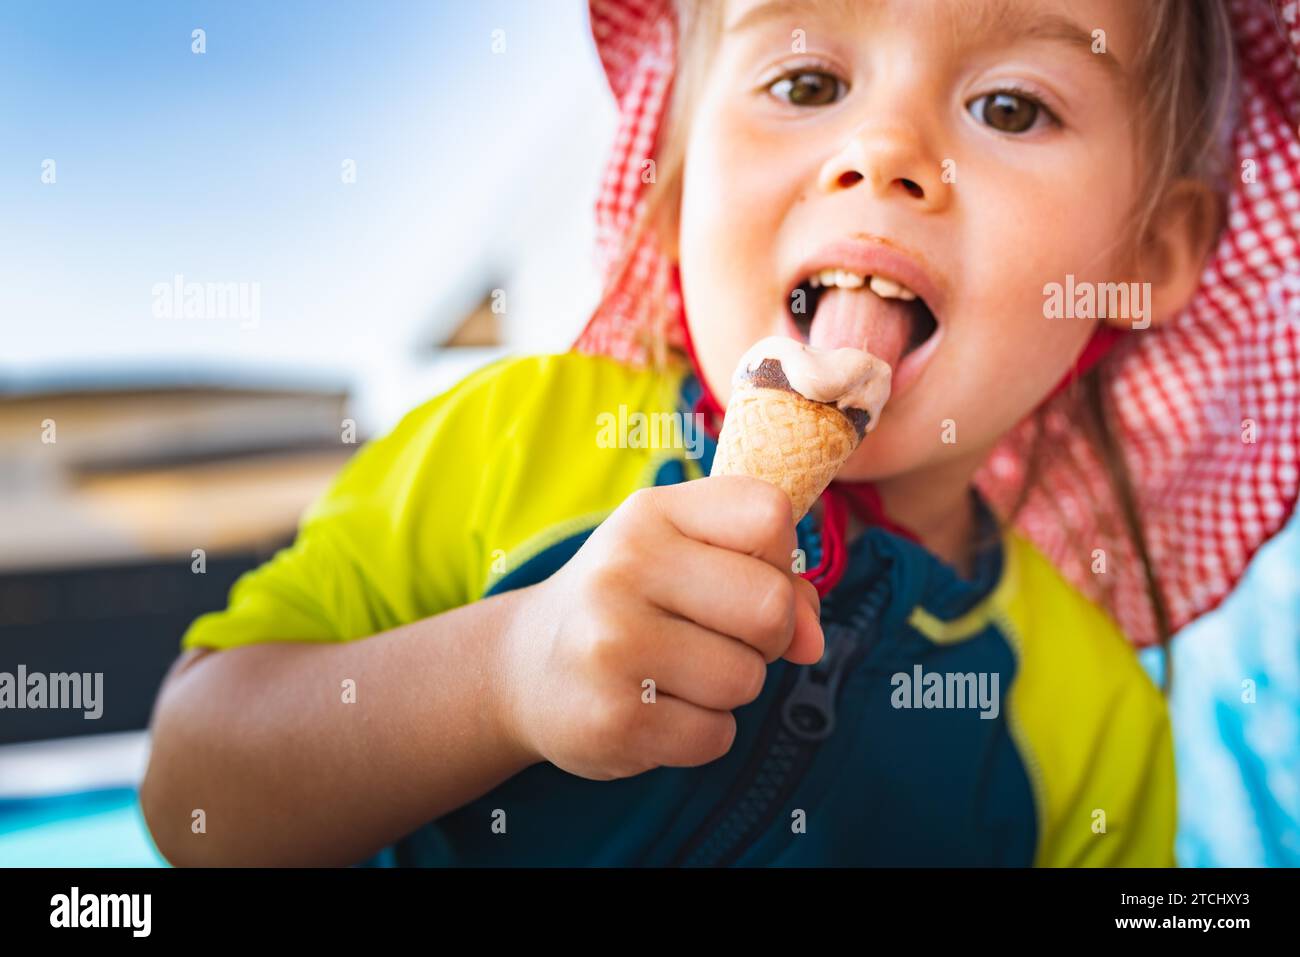 Portrait little child with big eyes licking icecream in summer. 2 year old baby girl. Kids eating sweets Stock Photo